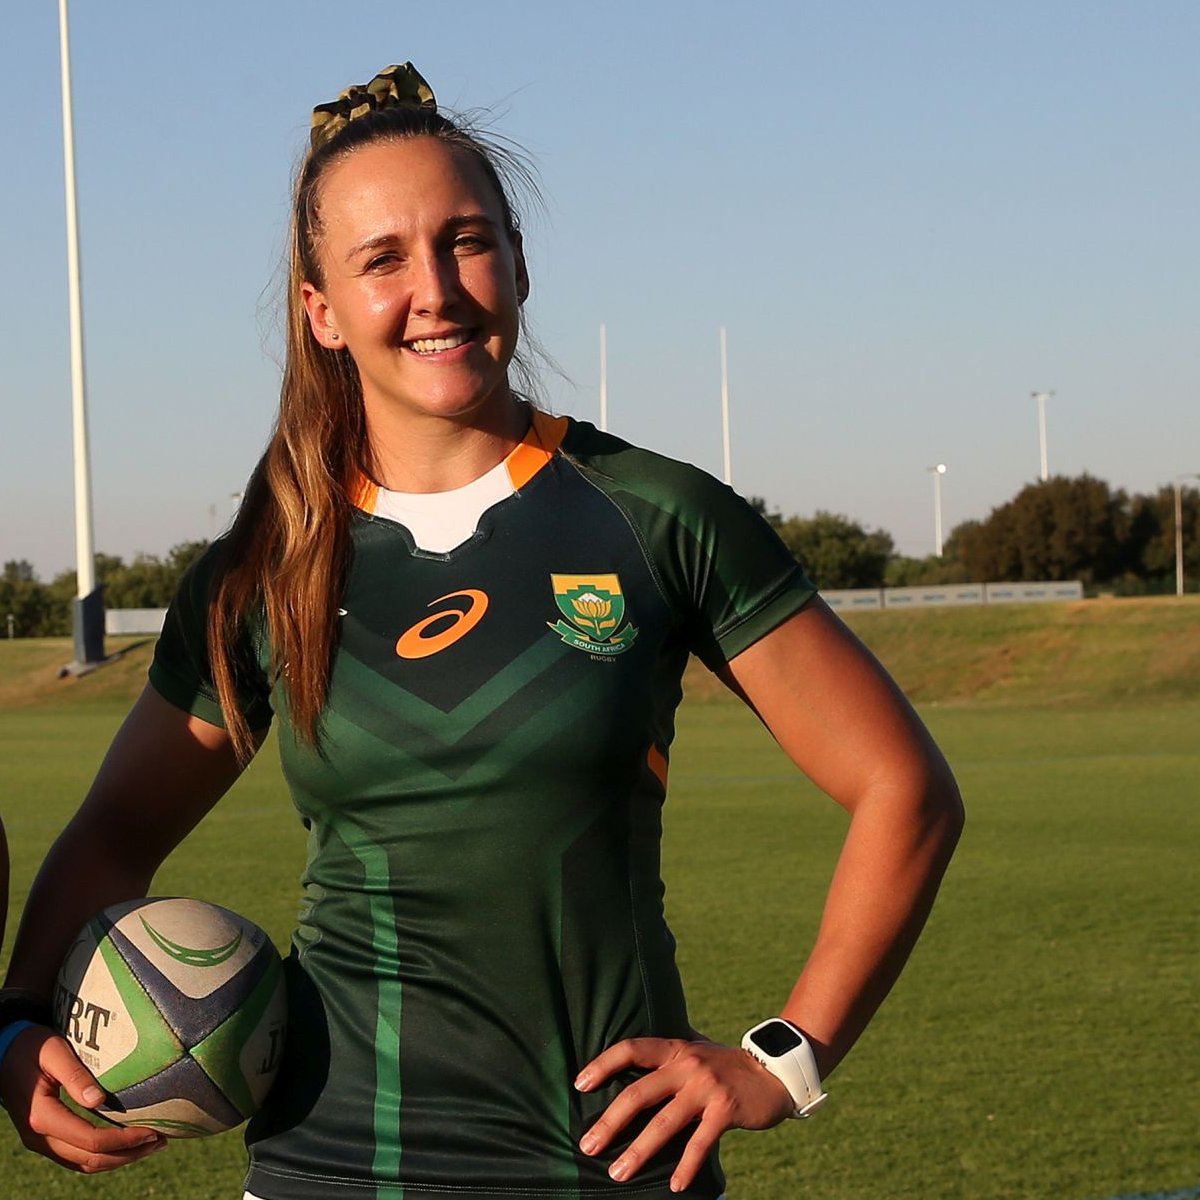 #TuksWomensRugby: #WomenOfUP

Libbie Janse van Rensburg, was recently crowned as Women's Player of the Year by the Blue Bulls Rugby Union.

Her try scored against Wales in the #NovemberSeries2021 has been nominated as Test Try of the Year by SA Rugby.

#Elevate2Greatness 🌟💡